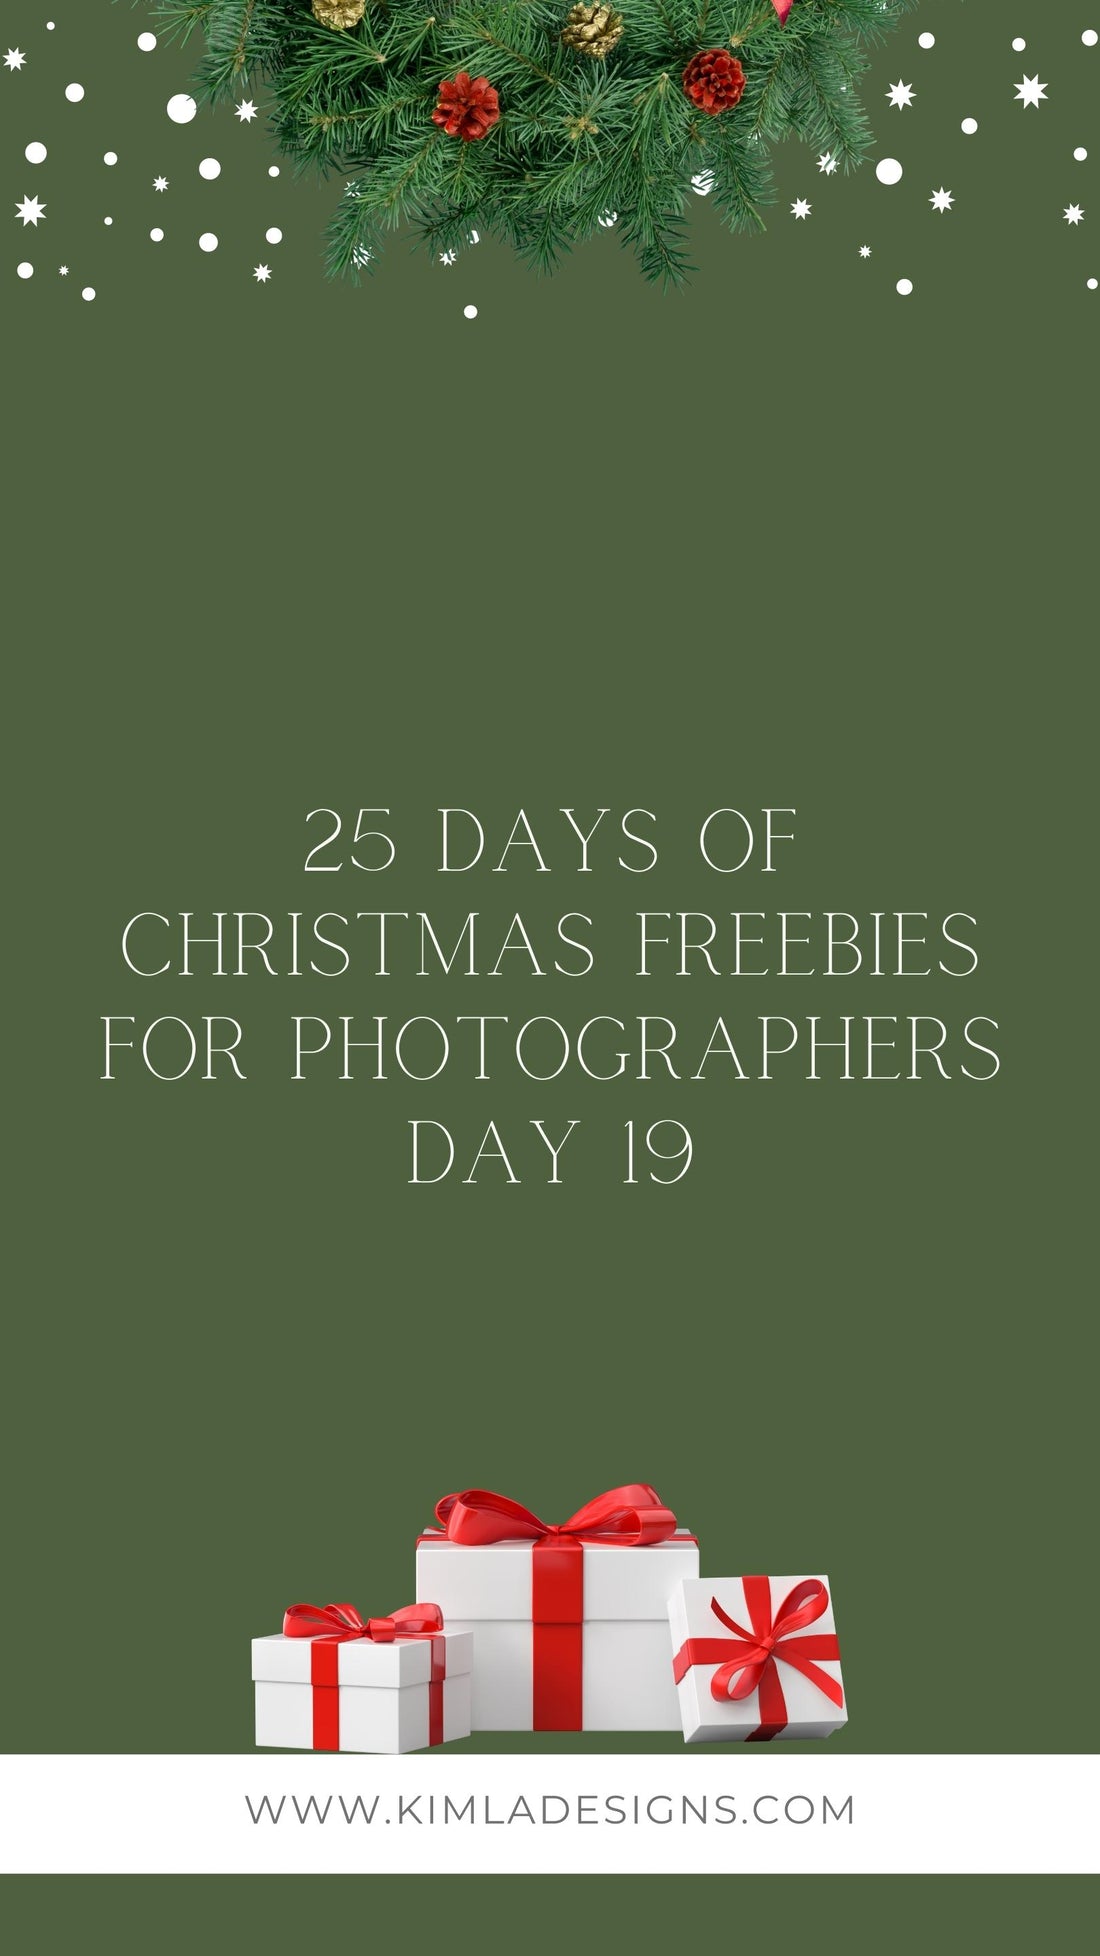 25 Days of Christmas Freebies Day 19th